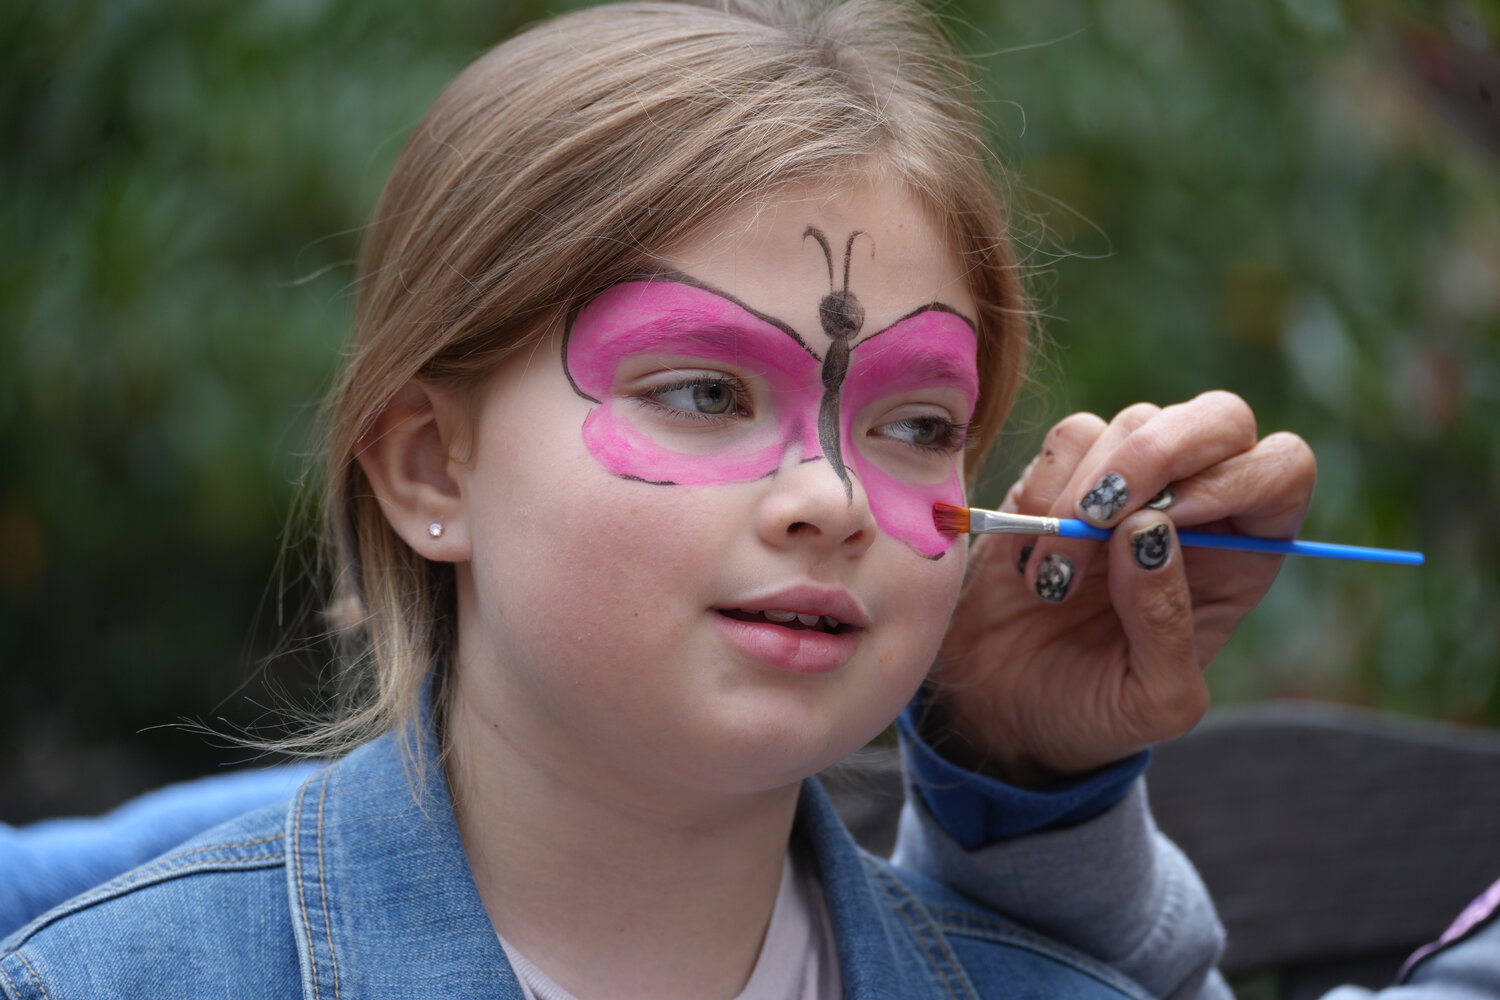 Charlotte Ruge, 8, gets her face painted at St. Jude’s Country Fair in Wantagh.